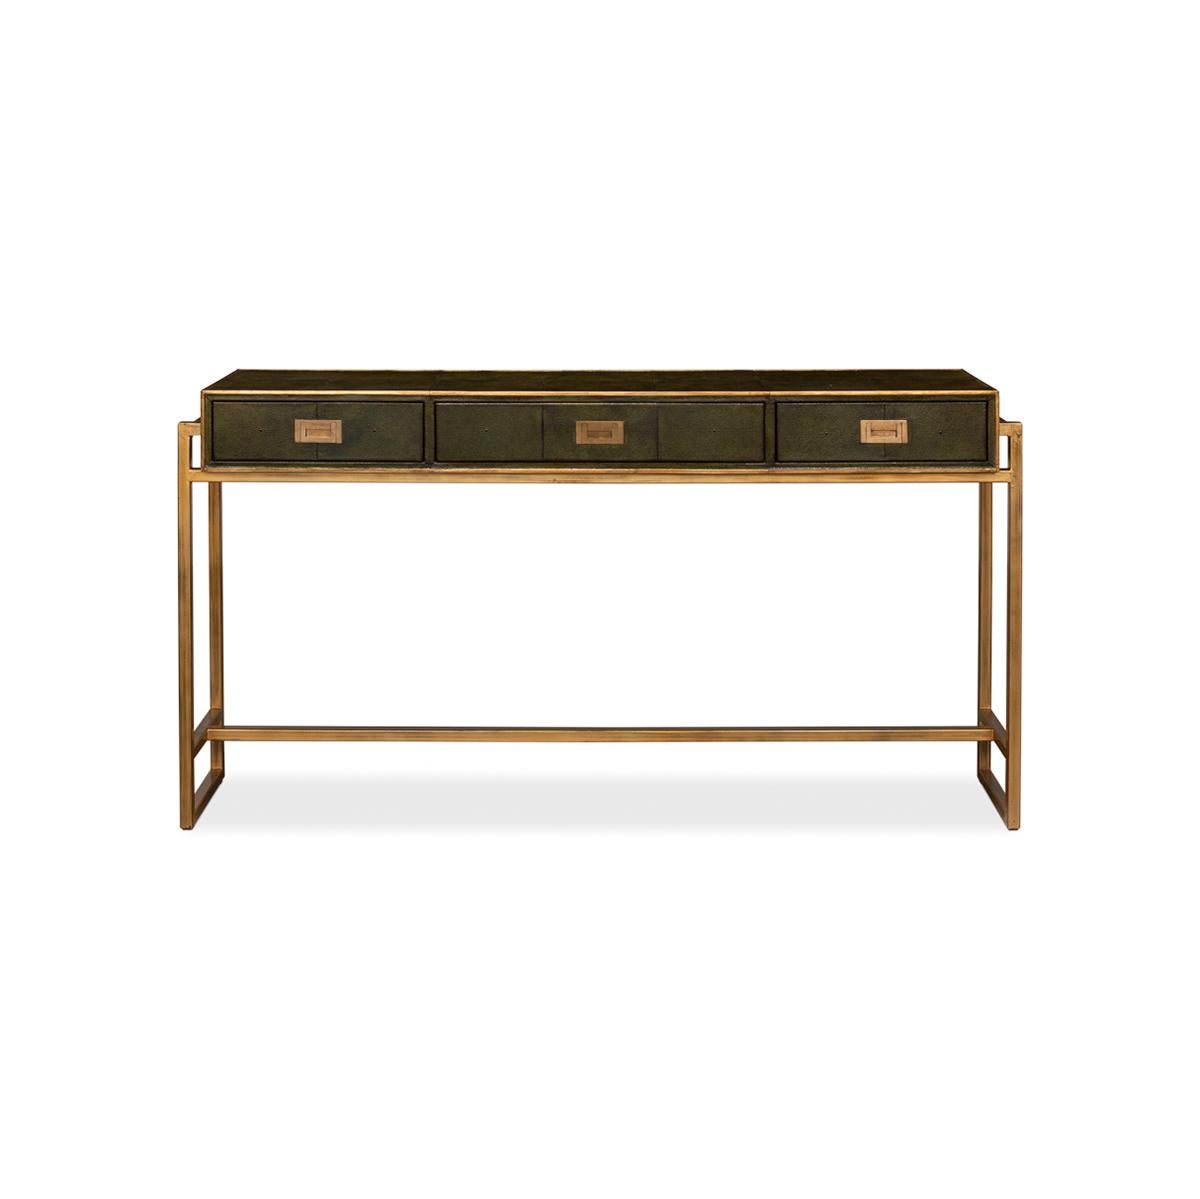 Our Modern Campaign Green Leather Wrapped Console Table is the perfect fusion of vintage and contemporary design. The dark green embossed leather wrapping is not only sleek, but it is also the perfect backdrop for the elegant gilded trim and brass